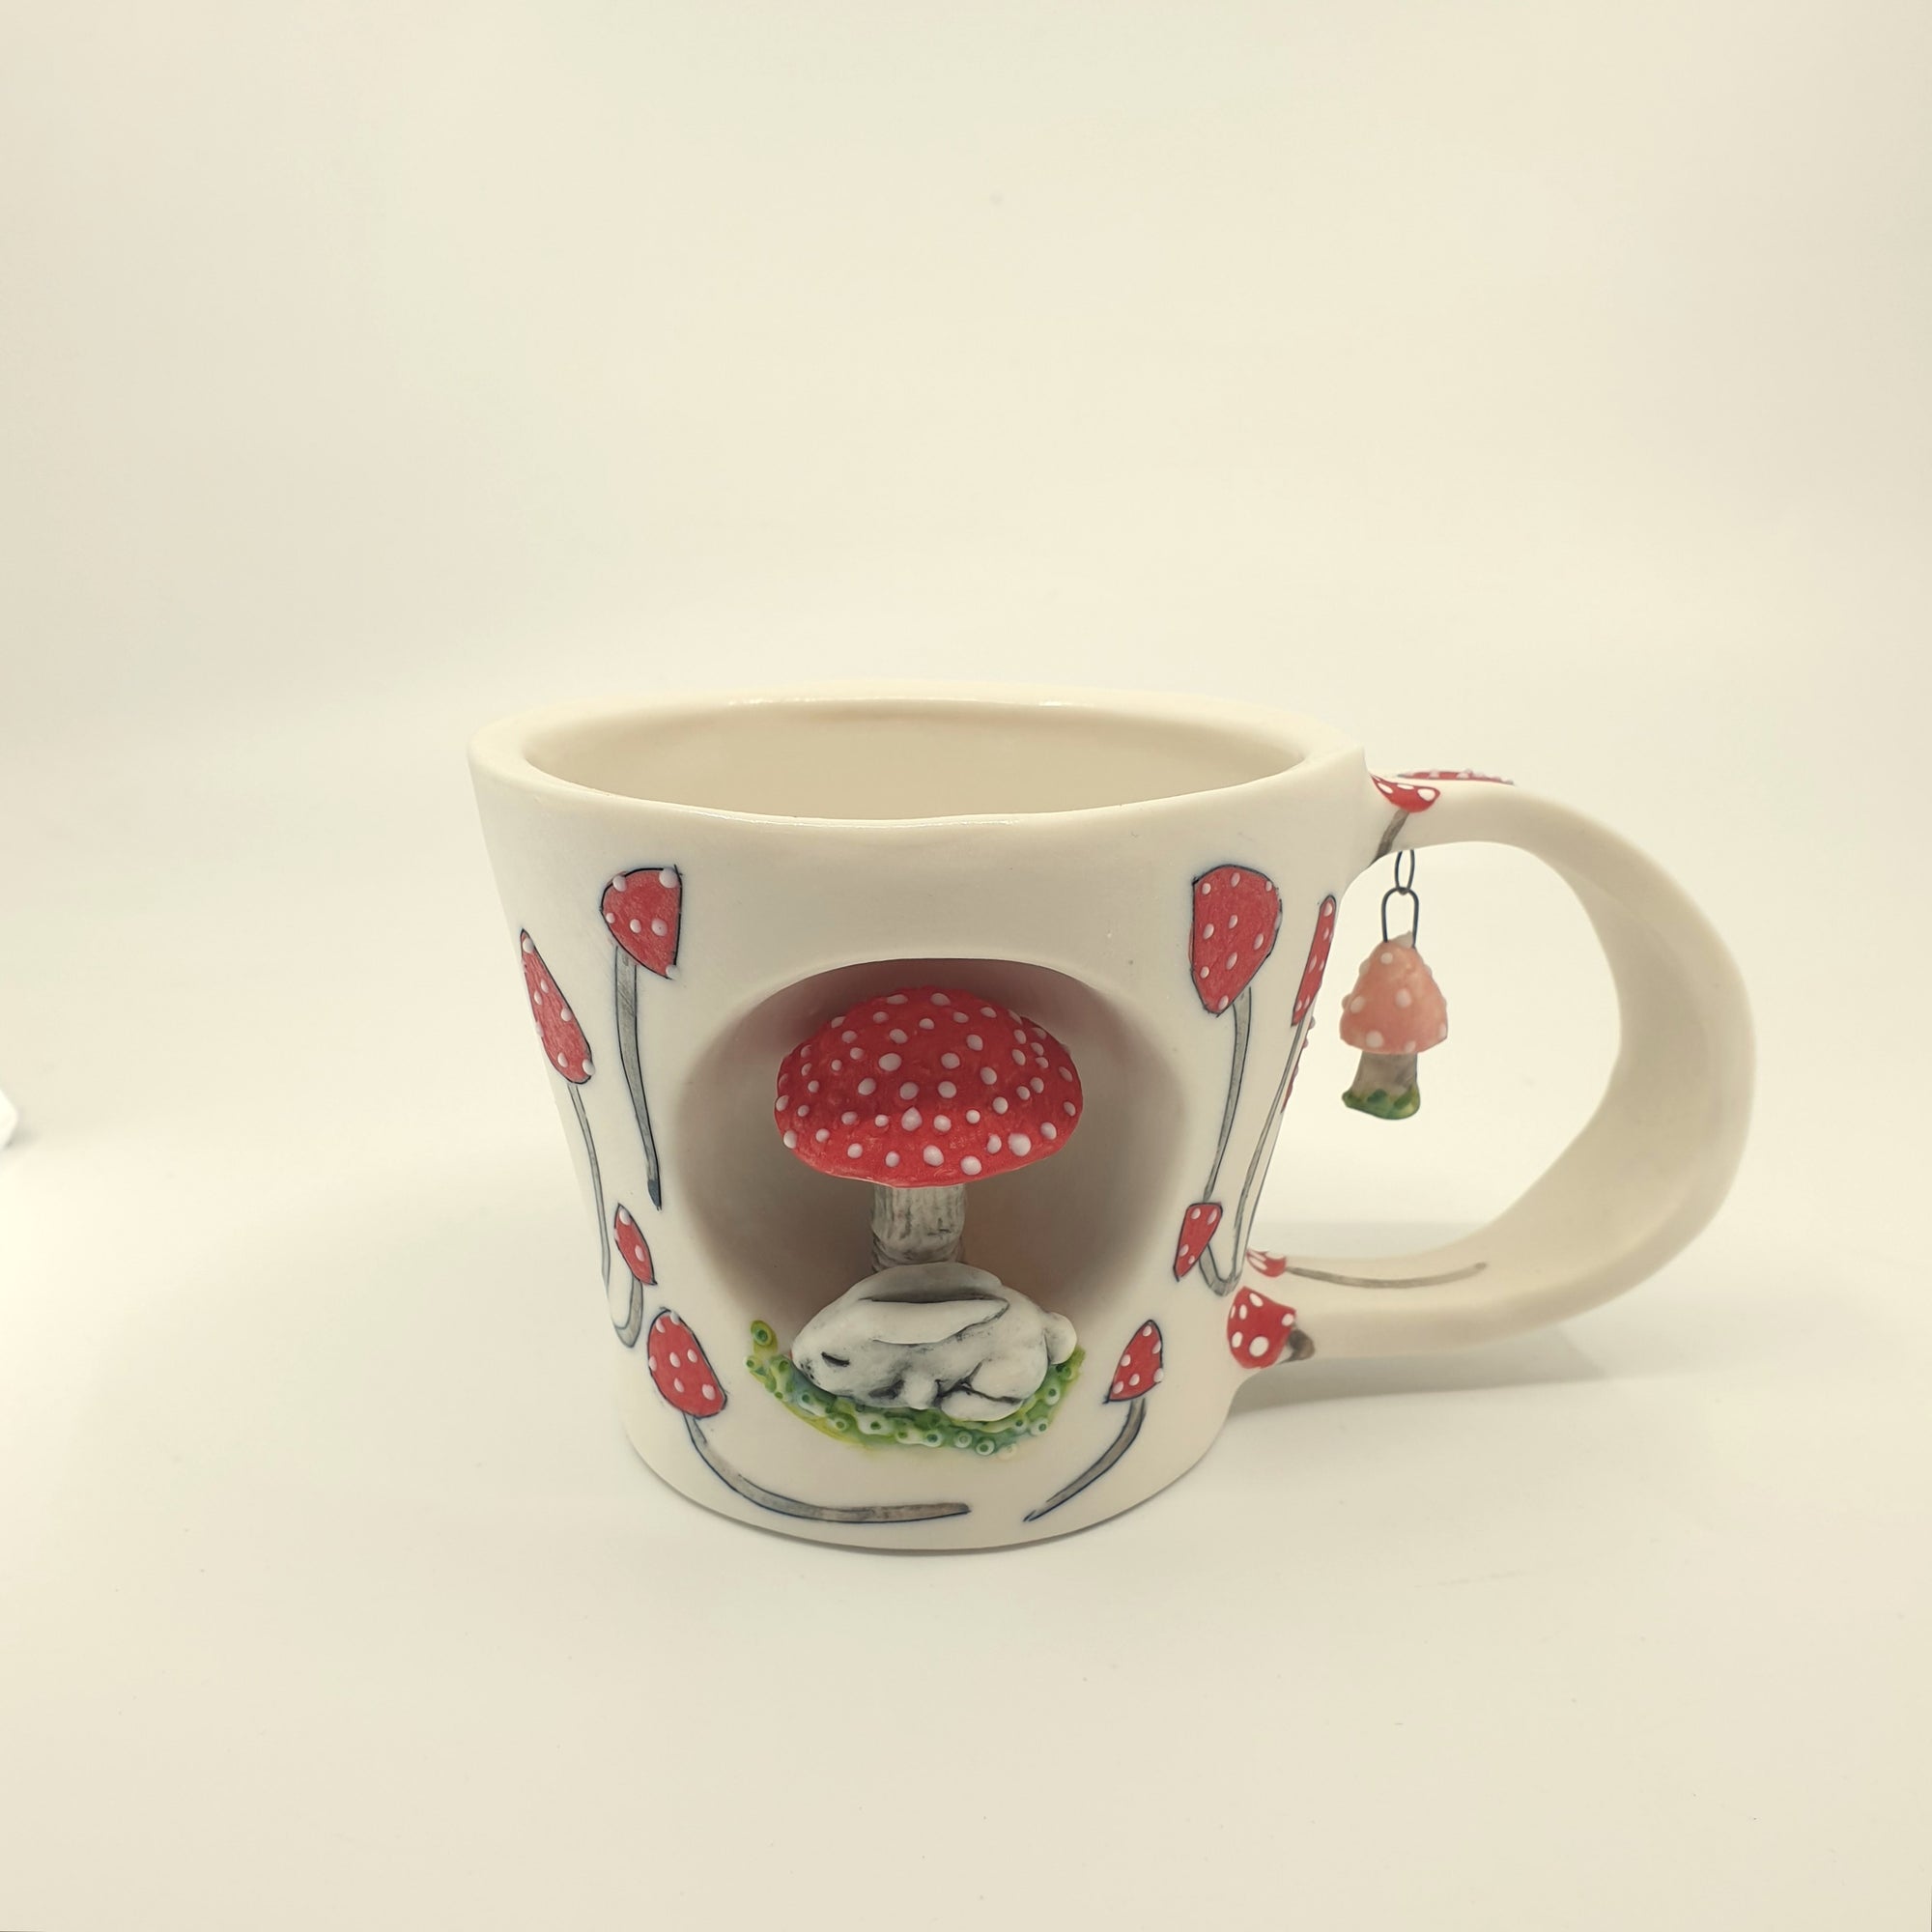 Porcelain bunny cup with red mushrooms